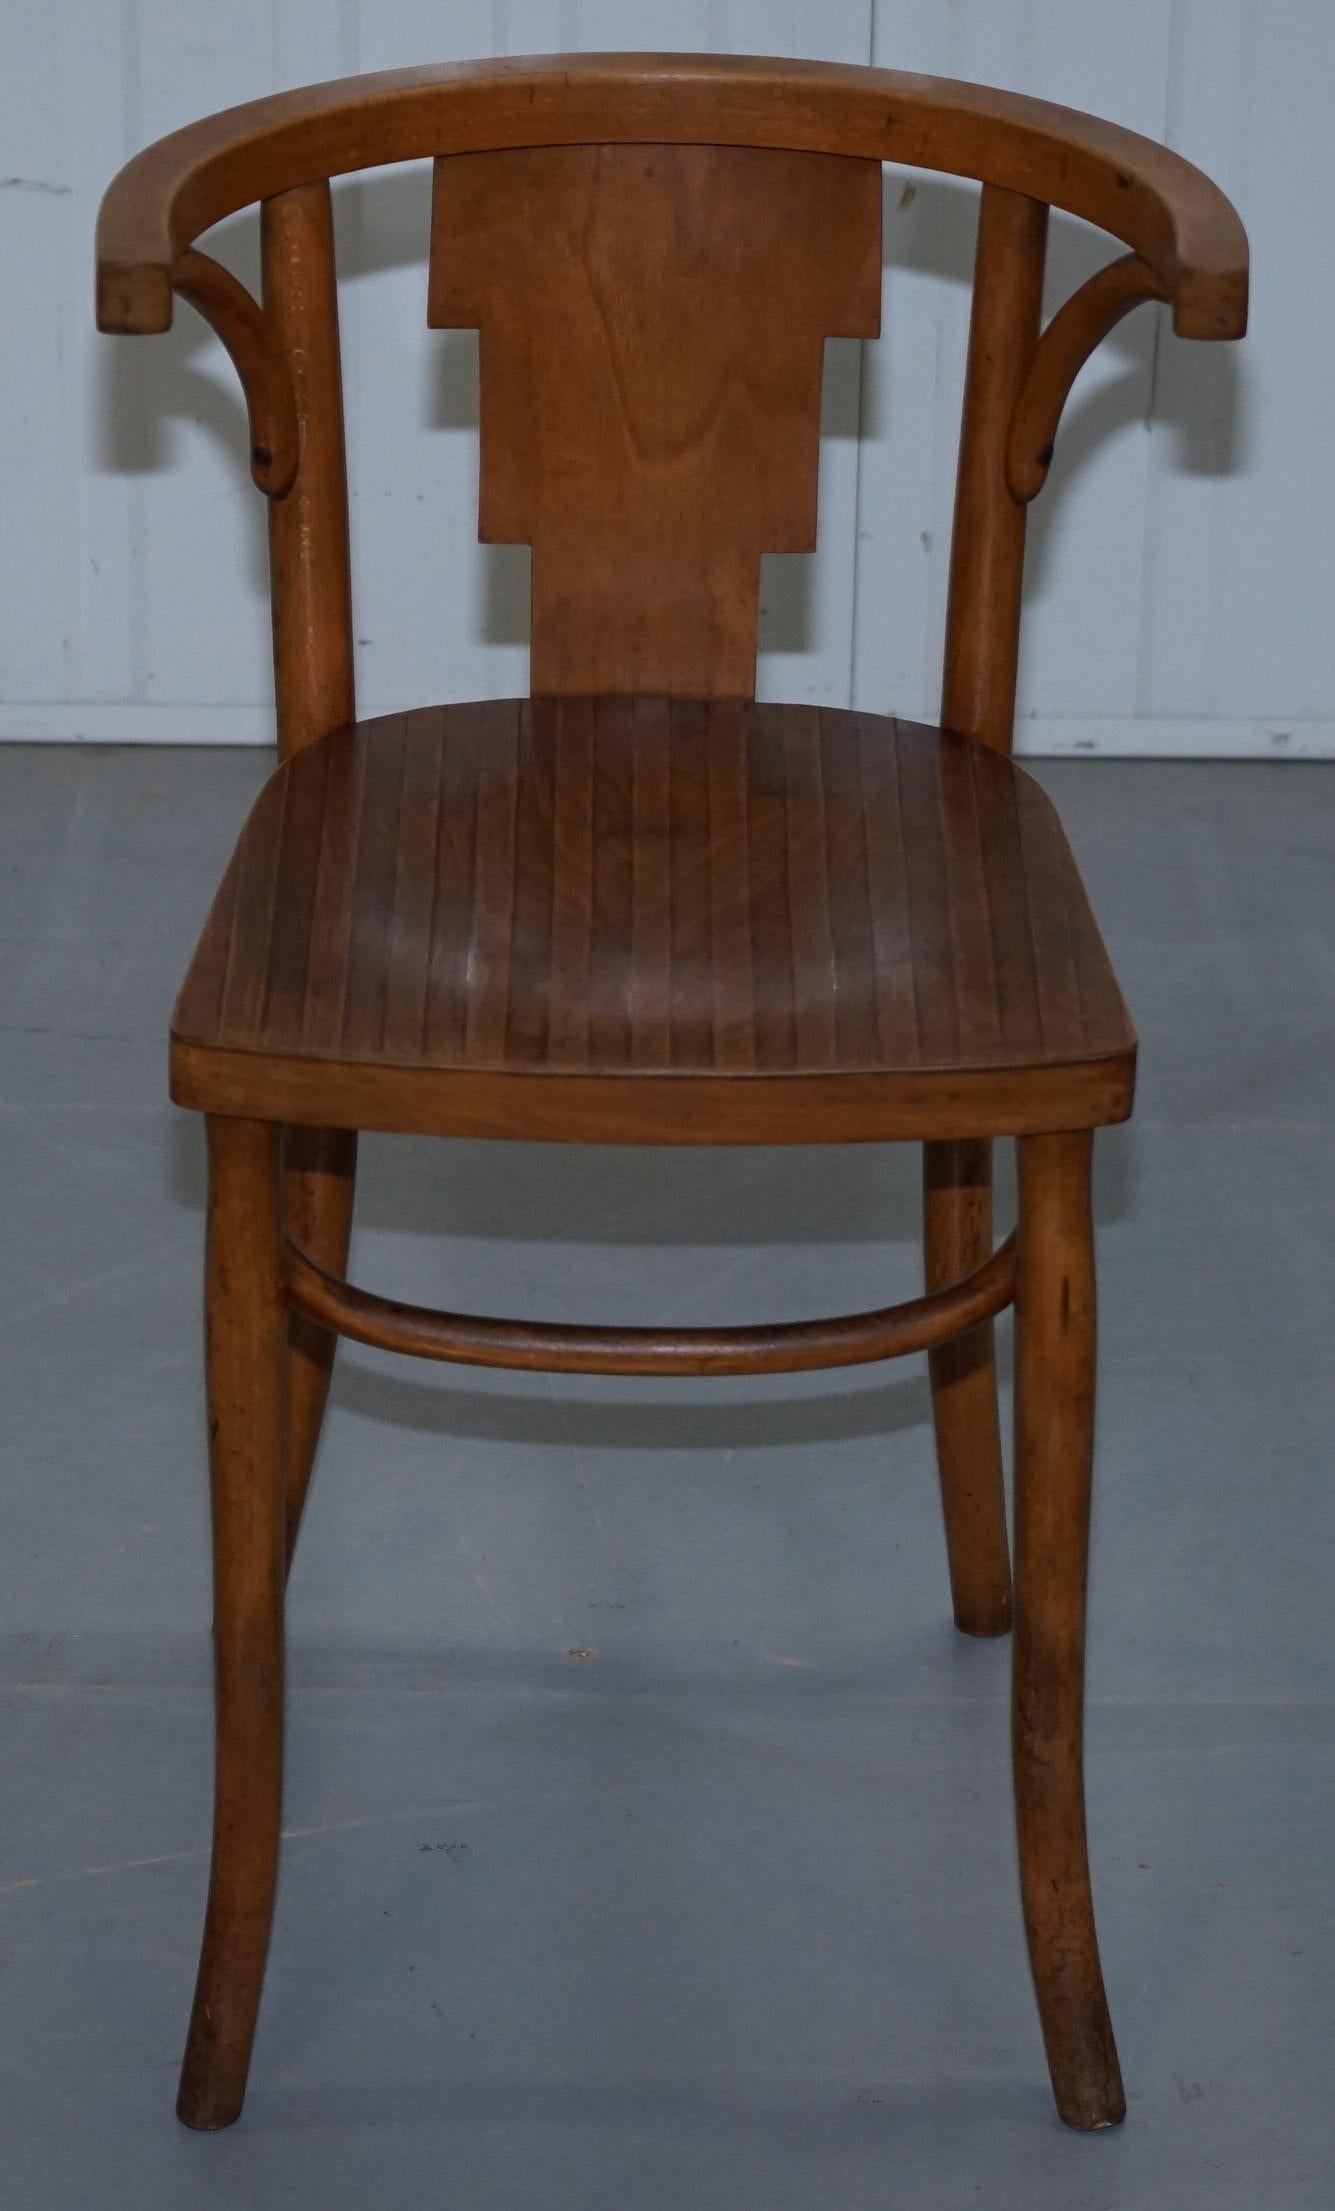 We are delighted to offer for sale this vintage Bentwood cock fighting smokers style armchair

A very cool and decorative armchair, great to use as a computer or office desk chair, the base looks to be made from slatted wood but its actually one